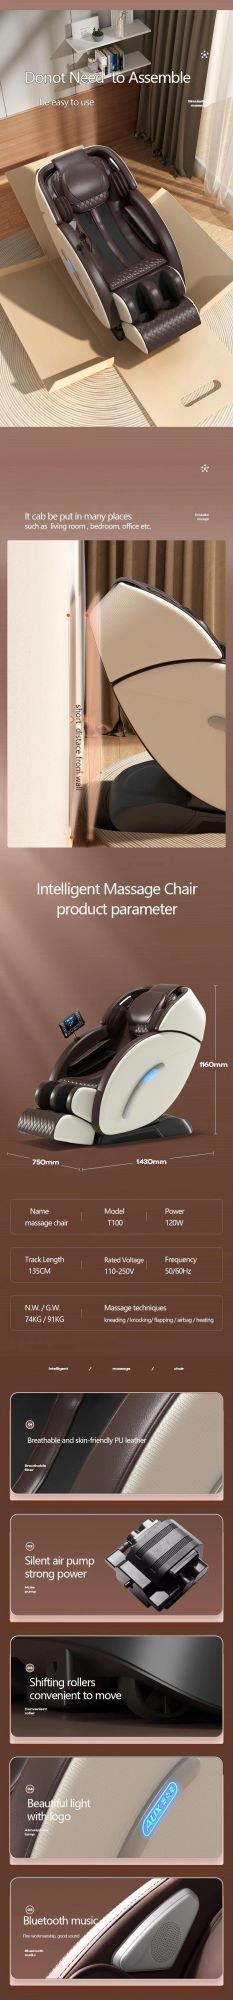 Sauron T100 New Product 3D Luxury Massager Chair Long SL Track Full Body Massage Chairs Cheap Price